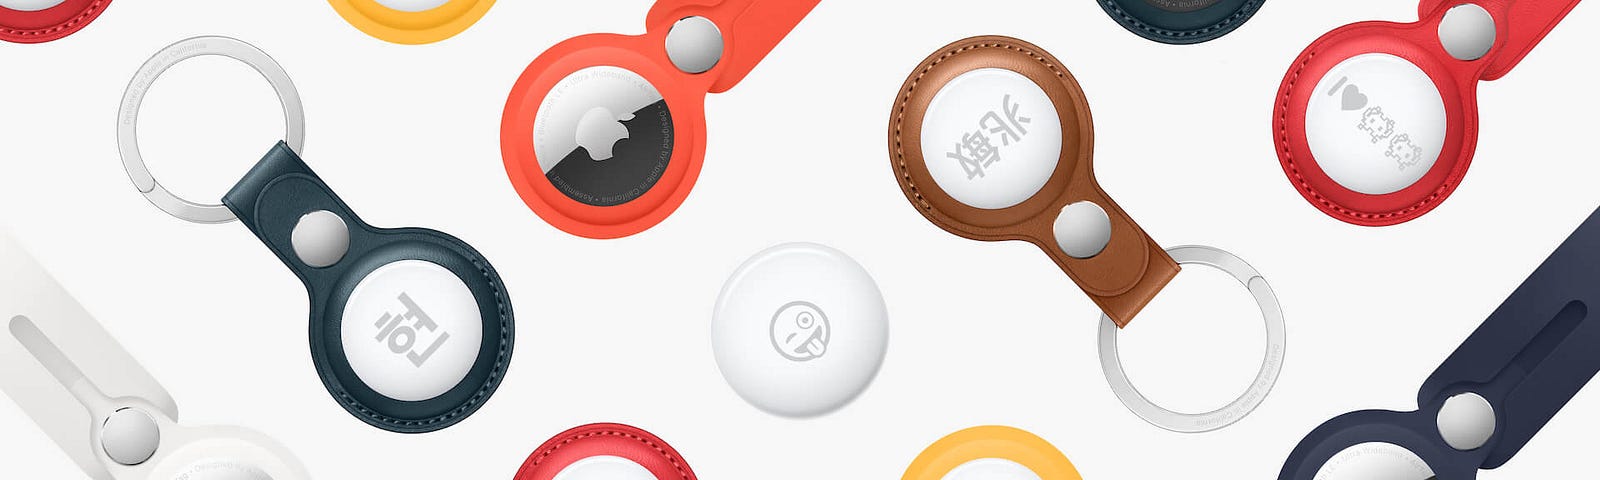 An assortment of AirTag accessories, individualized with various emoji and text.